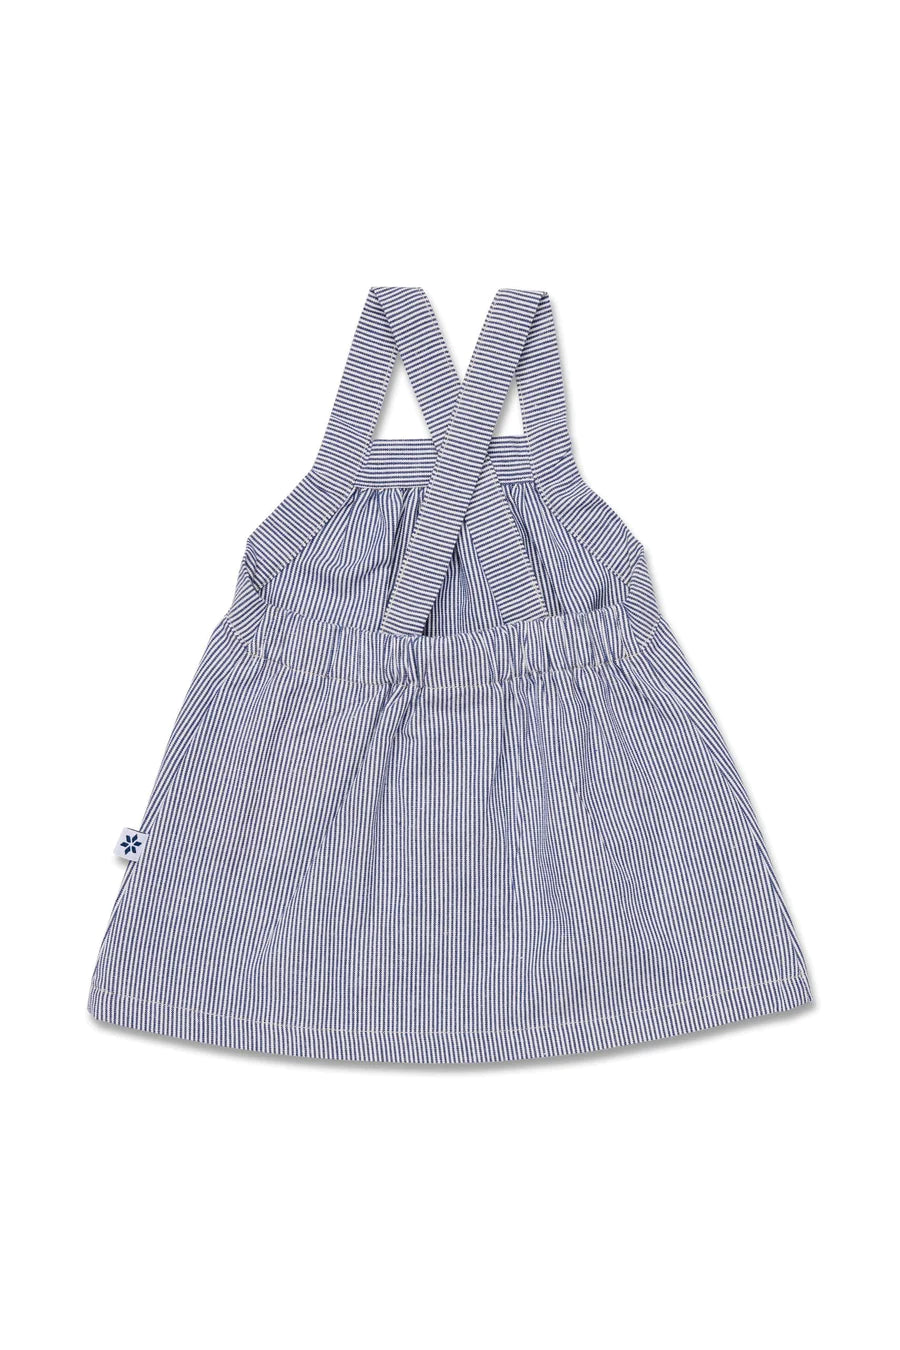 Marquise Mediterranean Dreaming Striped Pinafore - Navy Stripe